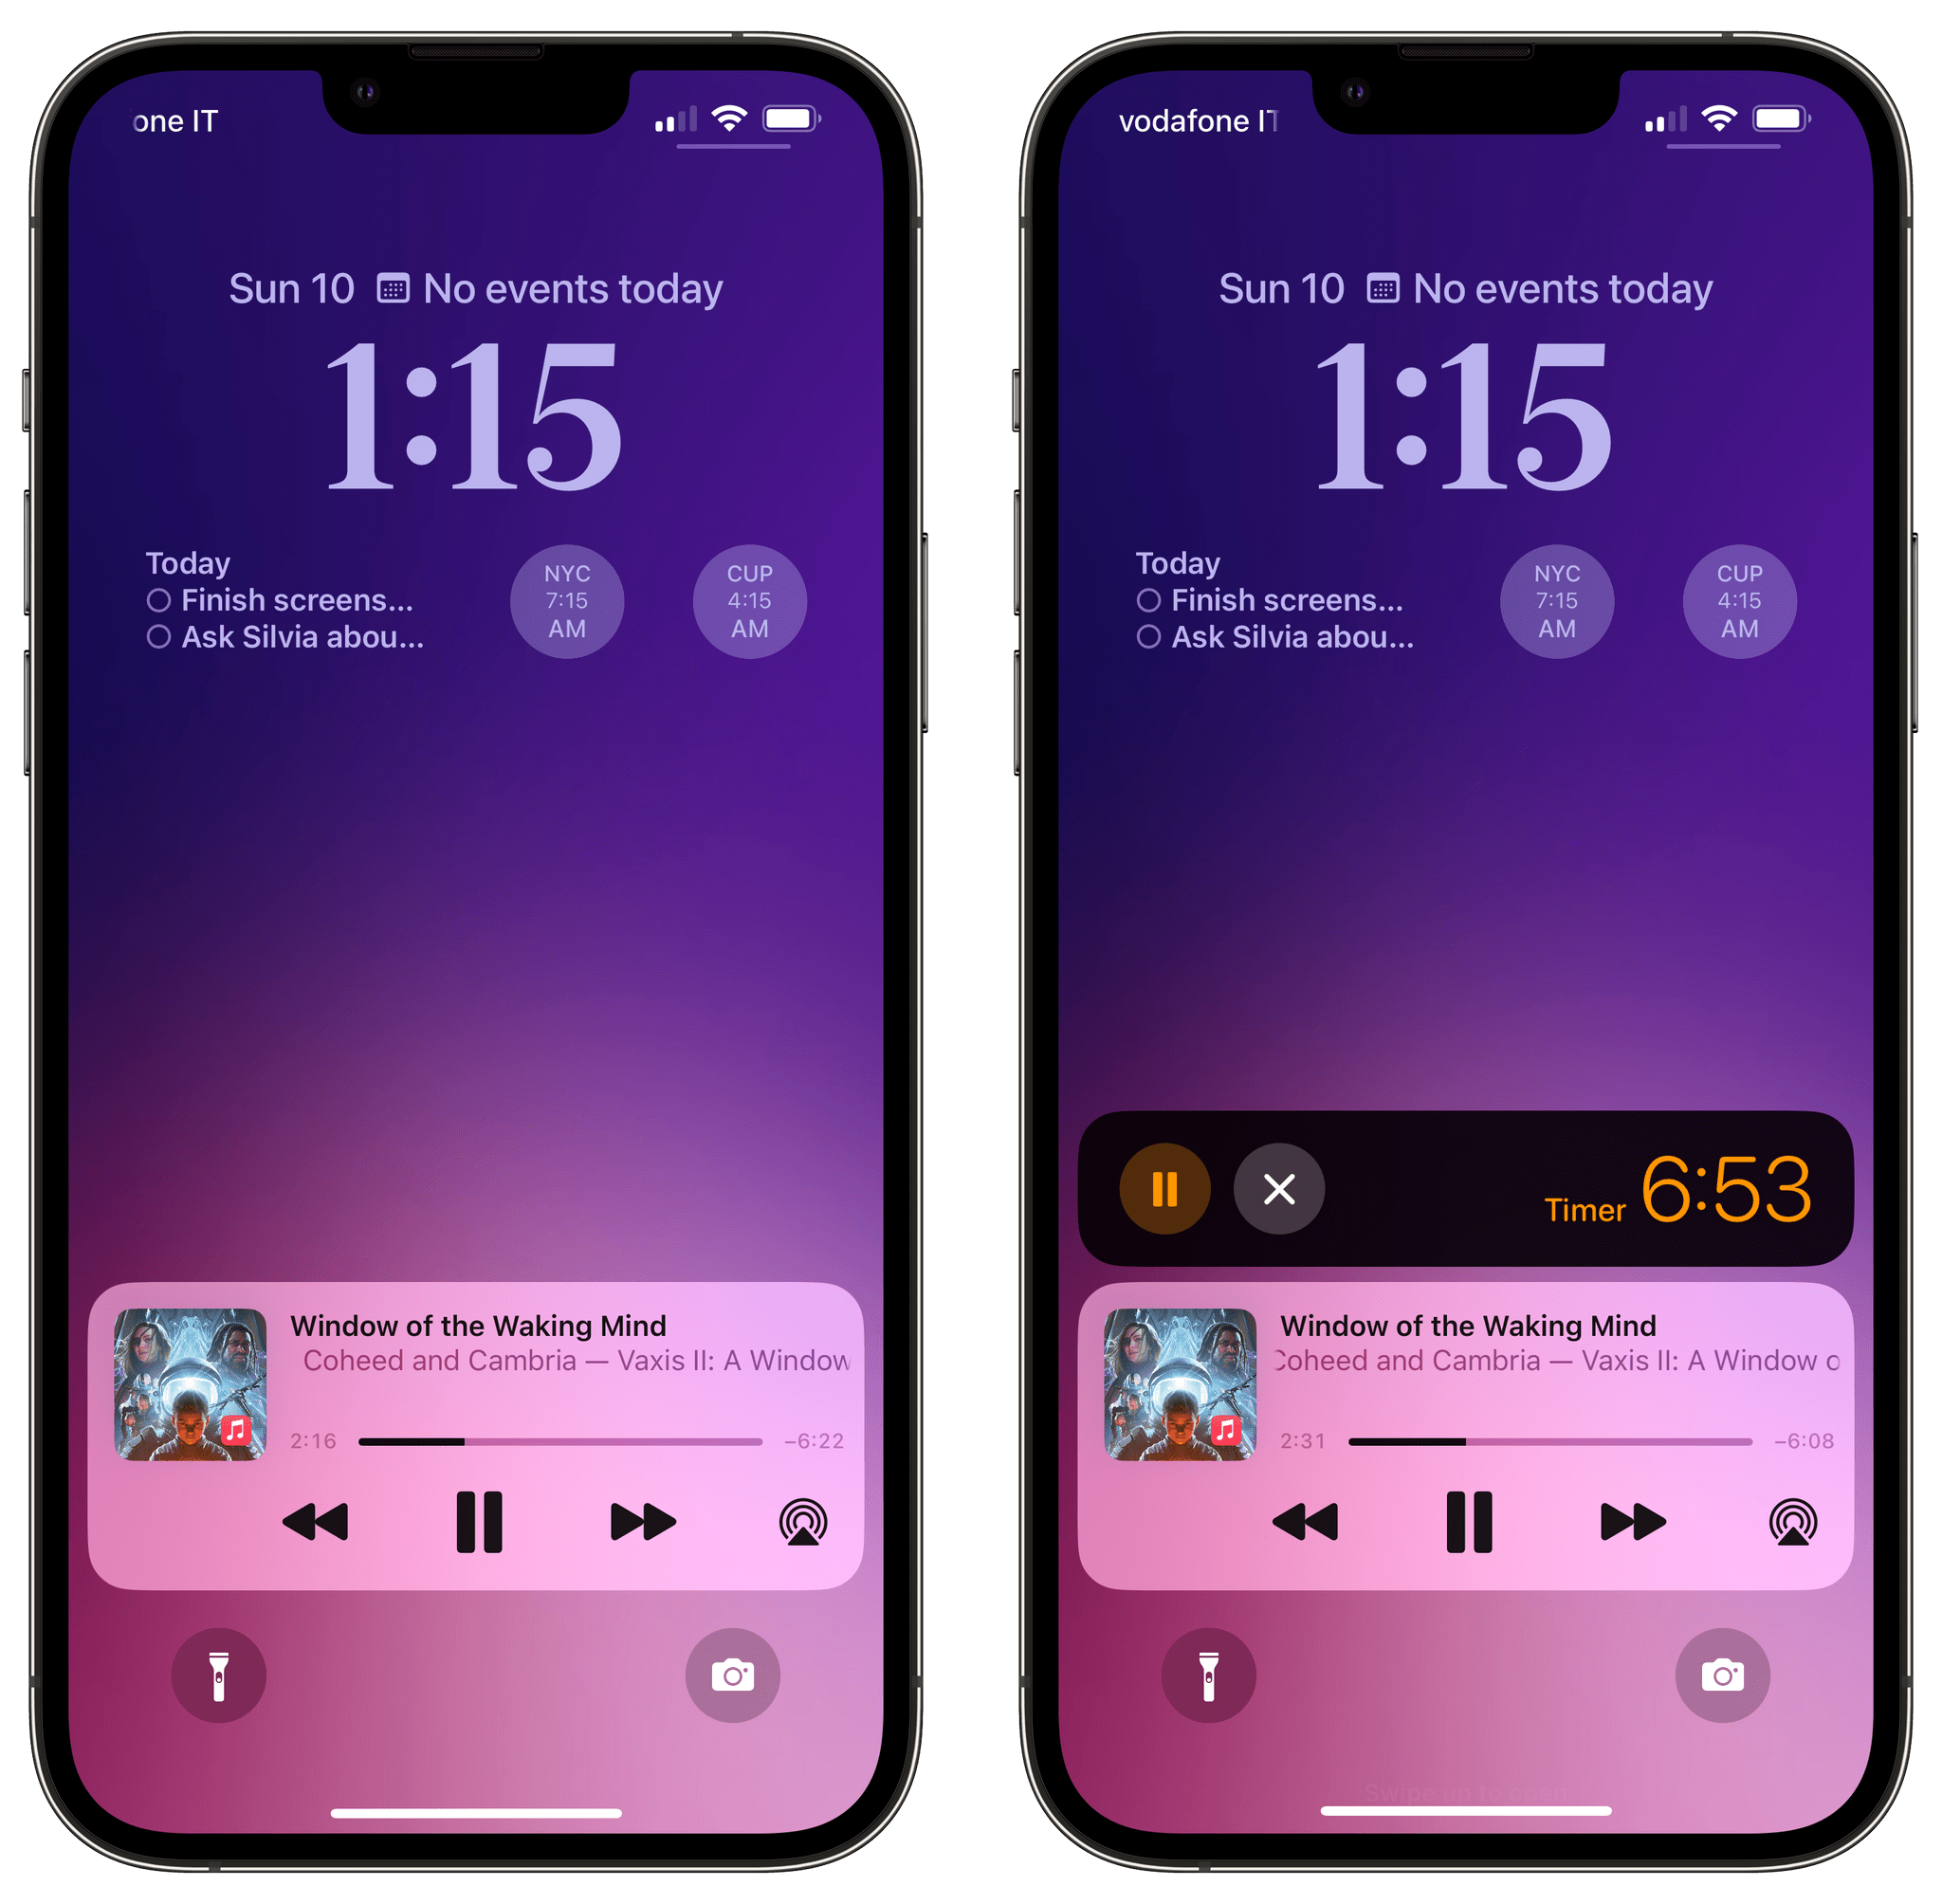 The Now Playing controls and Lock Screen timers have been reworked as special Live Activities in iOS 16.